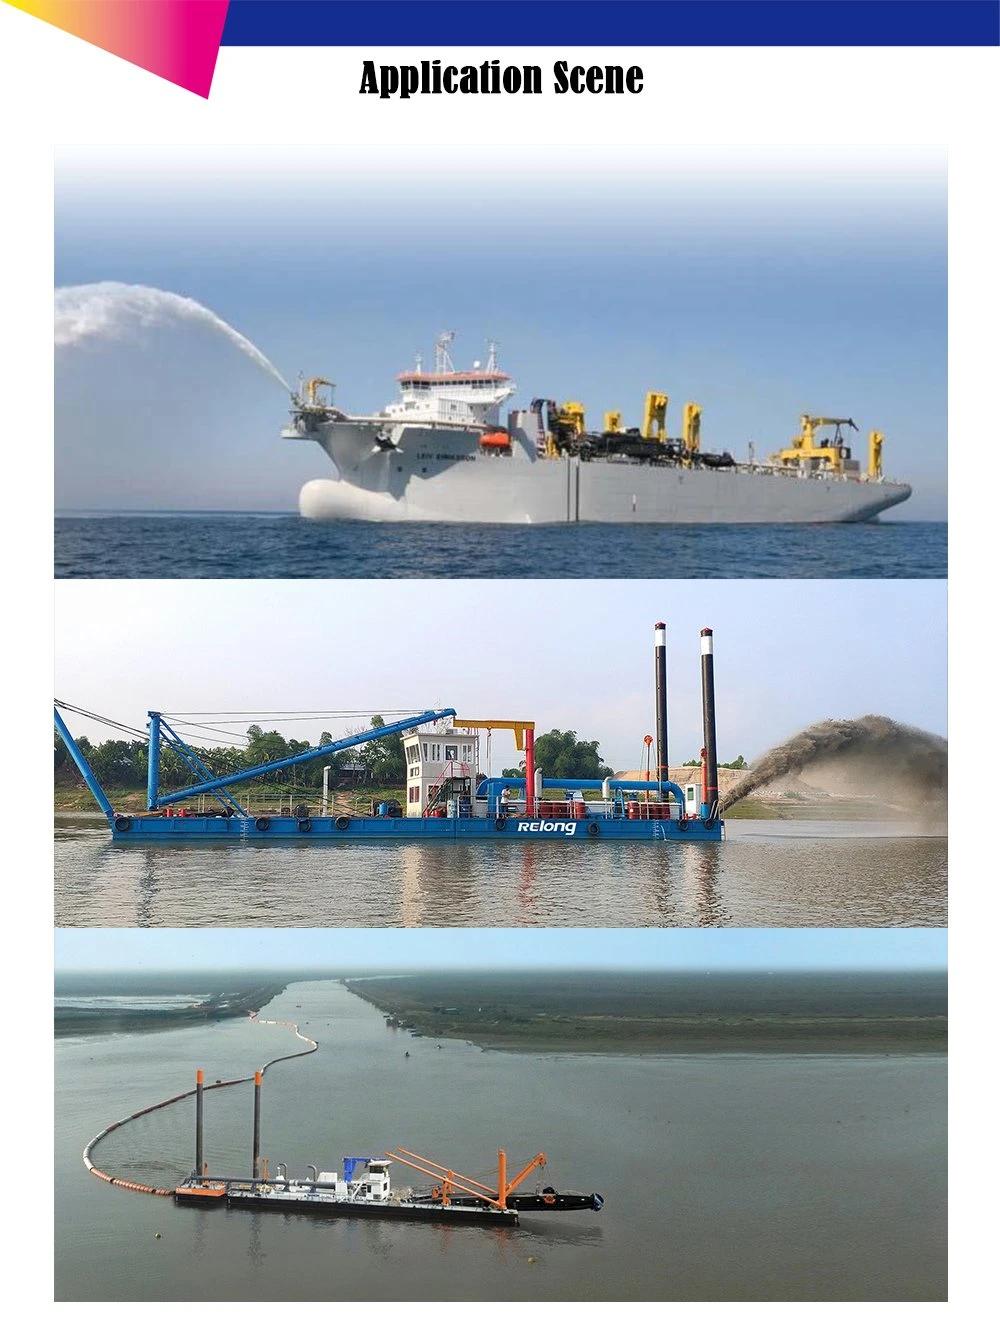 Most Professional Dredging System Designer and Provider From China